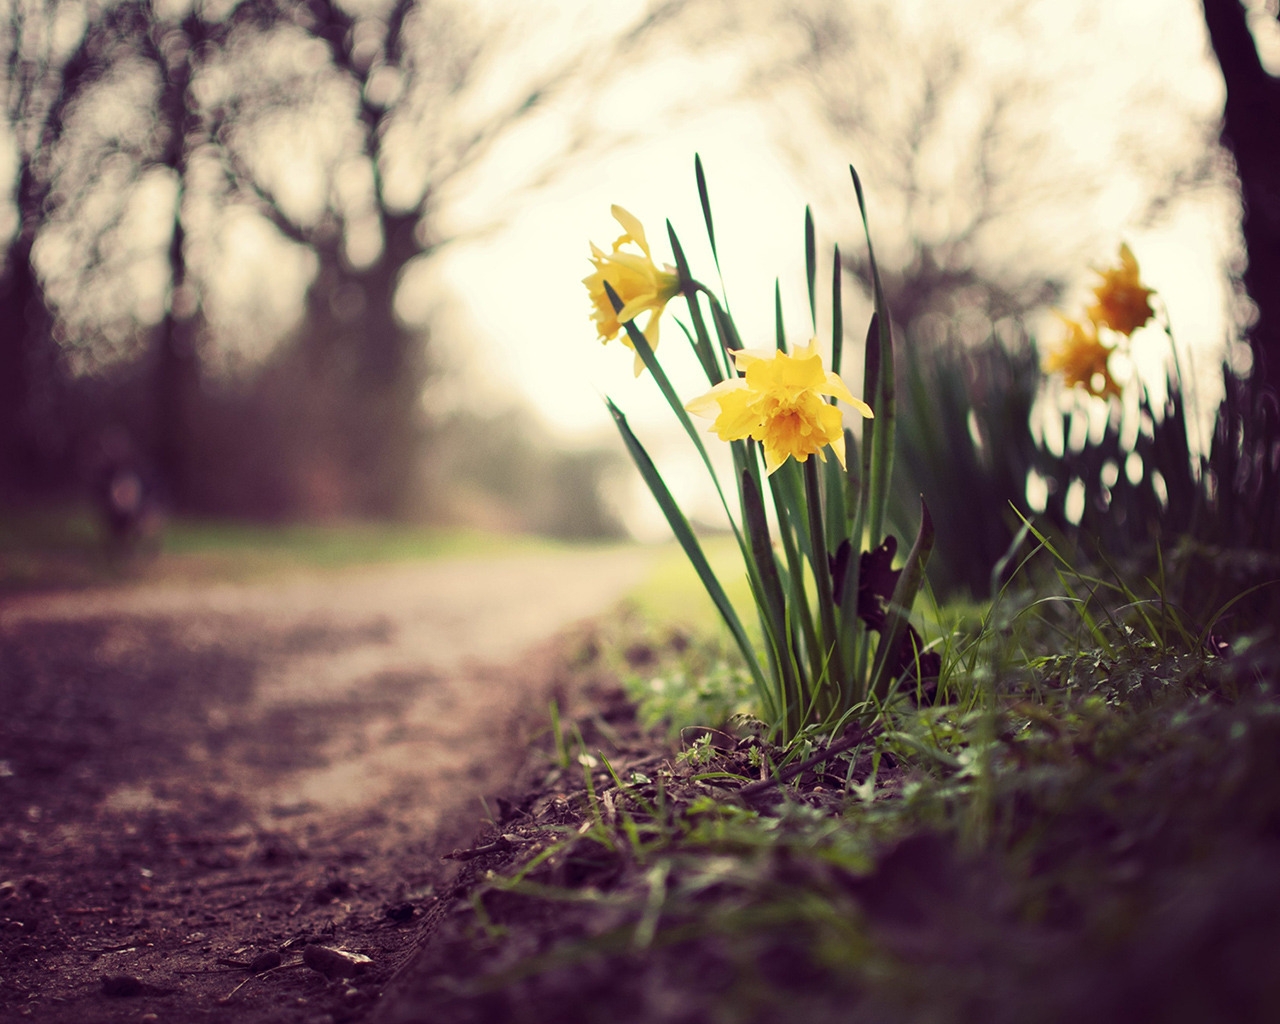 Daffodils on the Road for 1280 x 1024 resolution